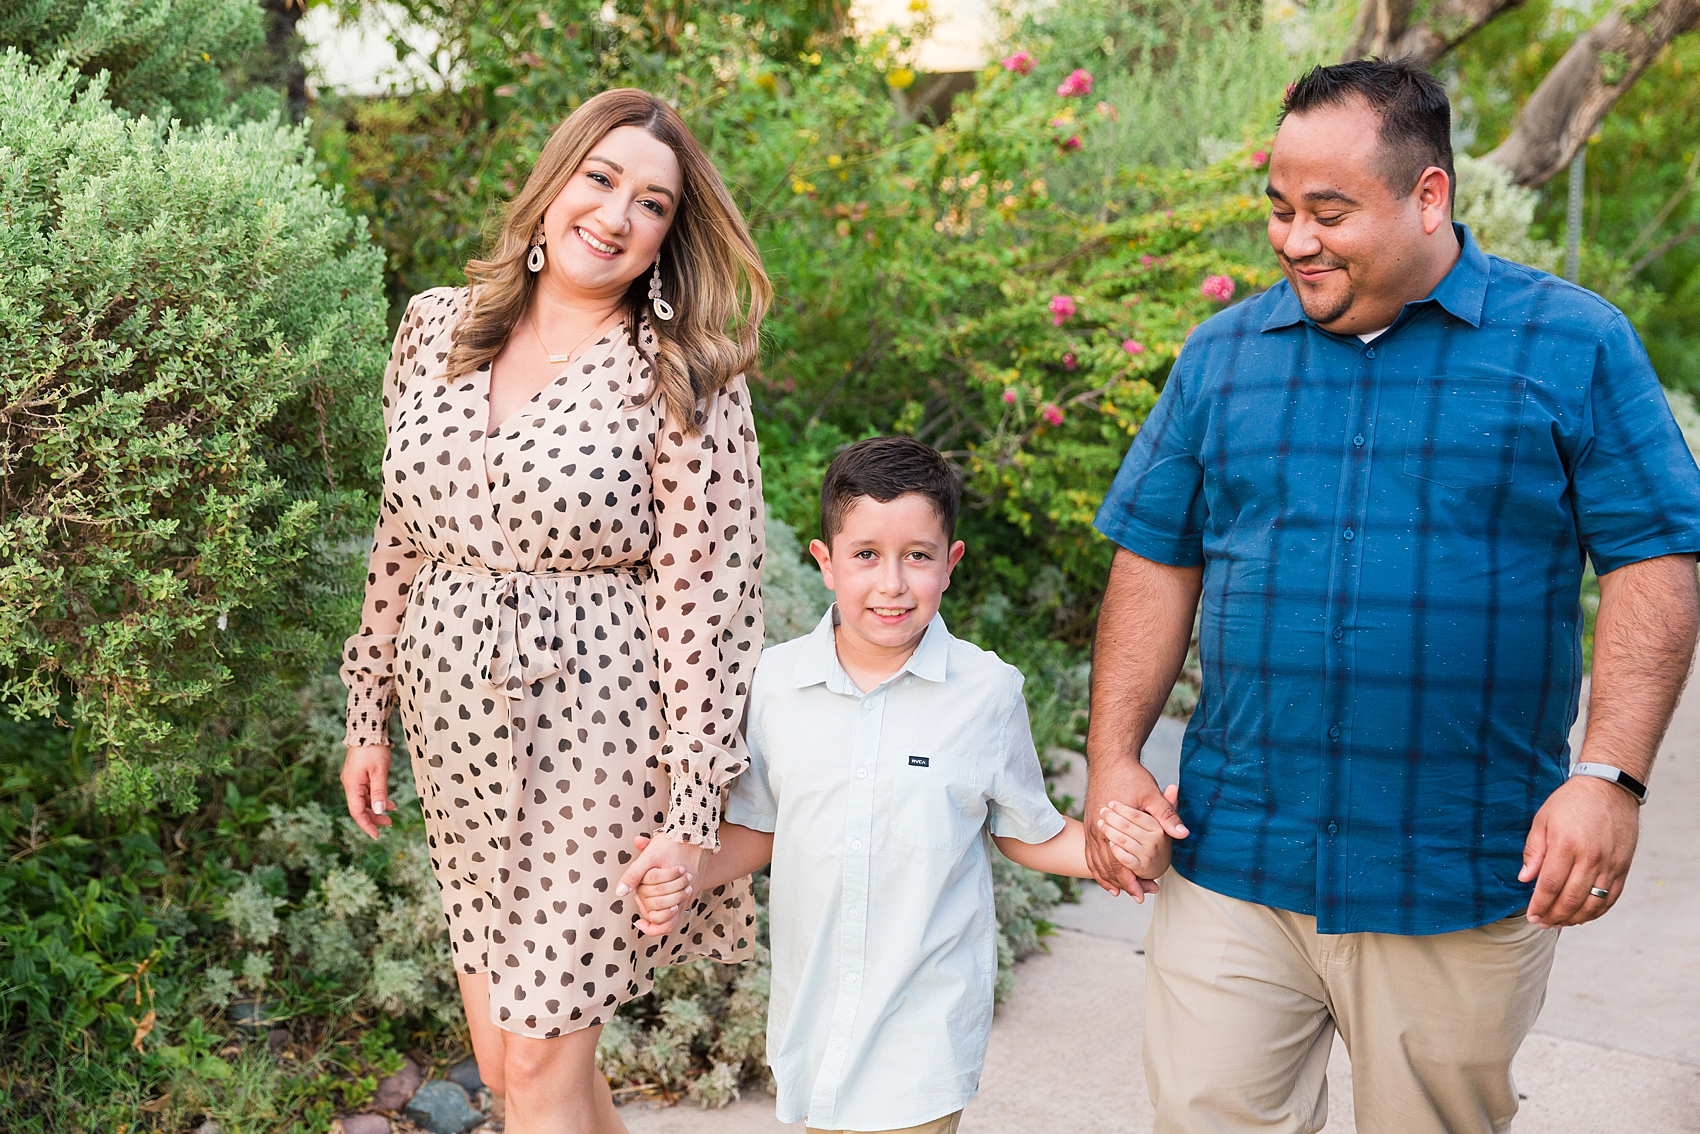 Leah Hope Photography | Phoenix Arizona Old Town Scottsdale Family Pregnancy Announcement Pictures 